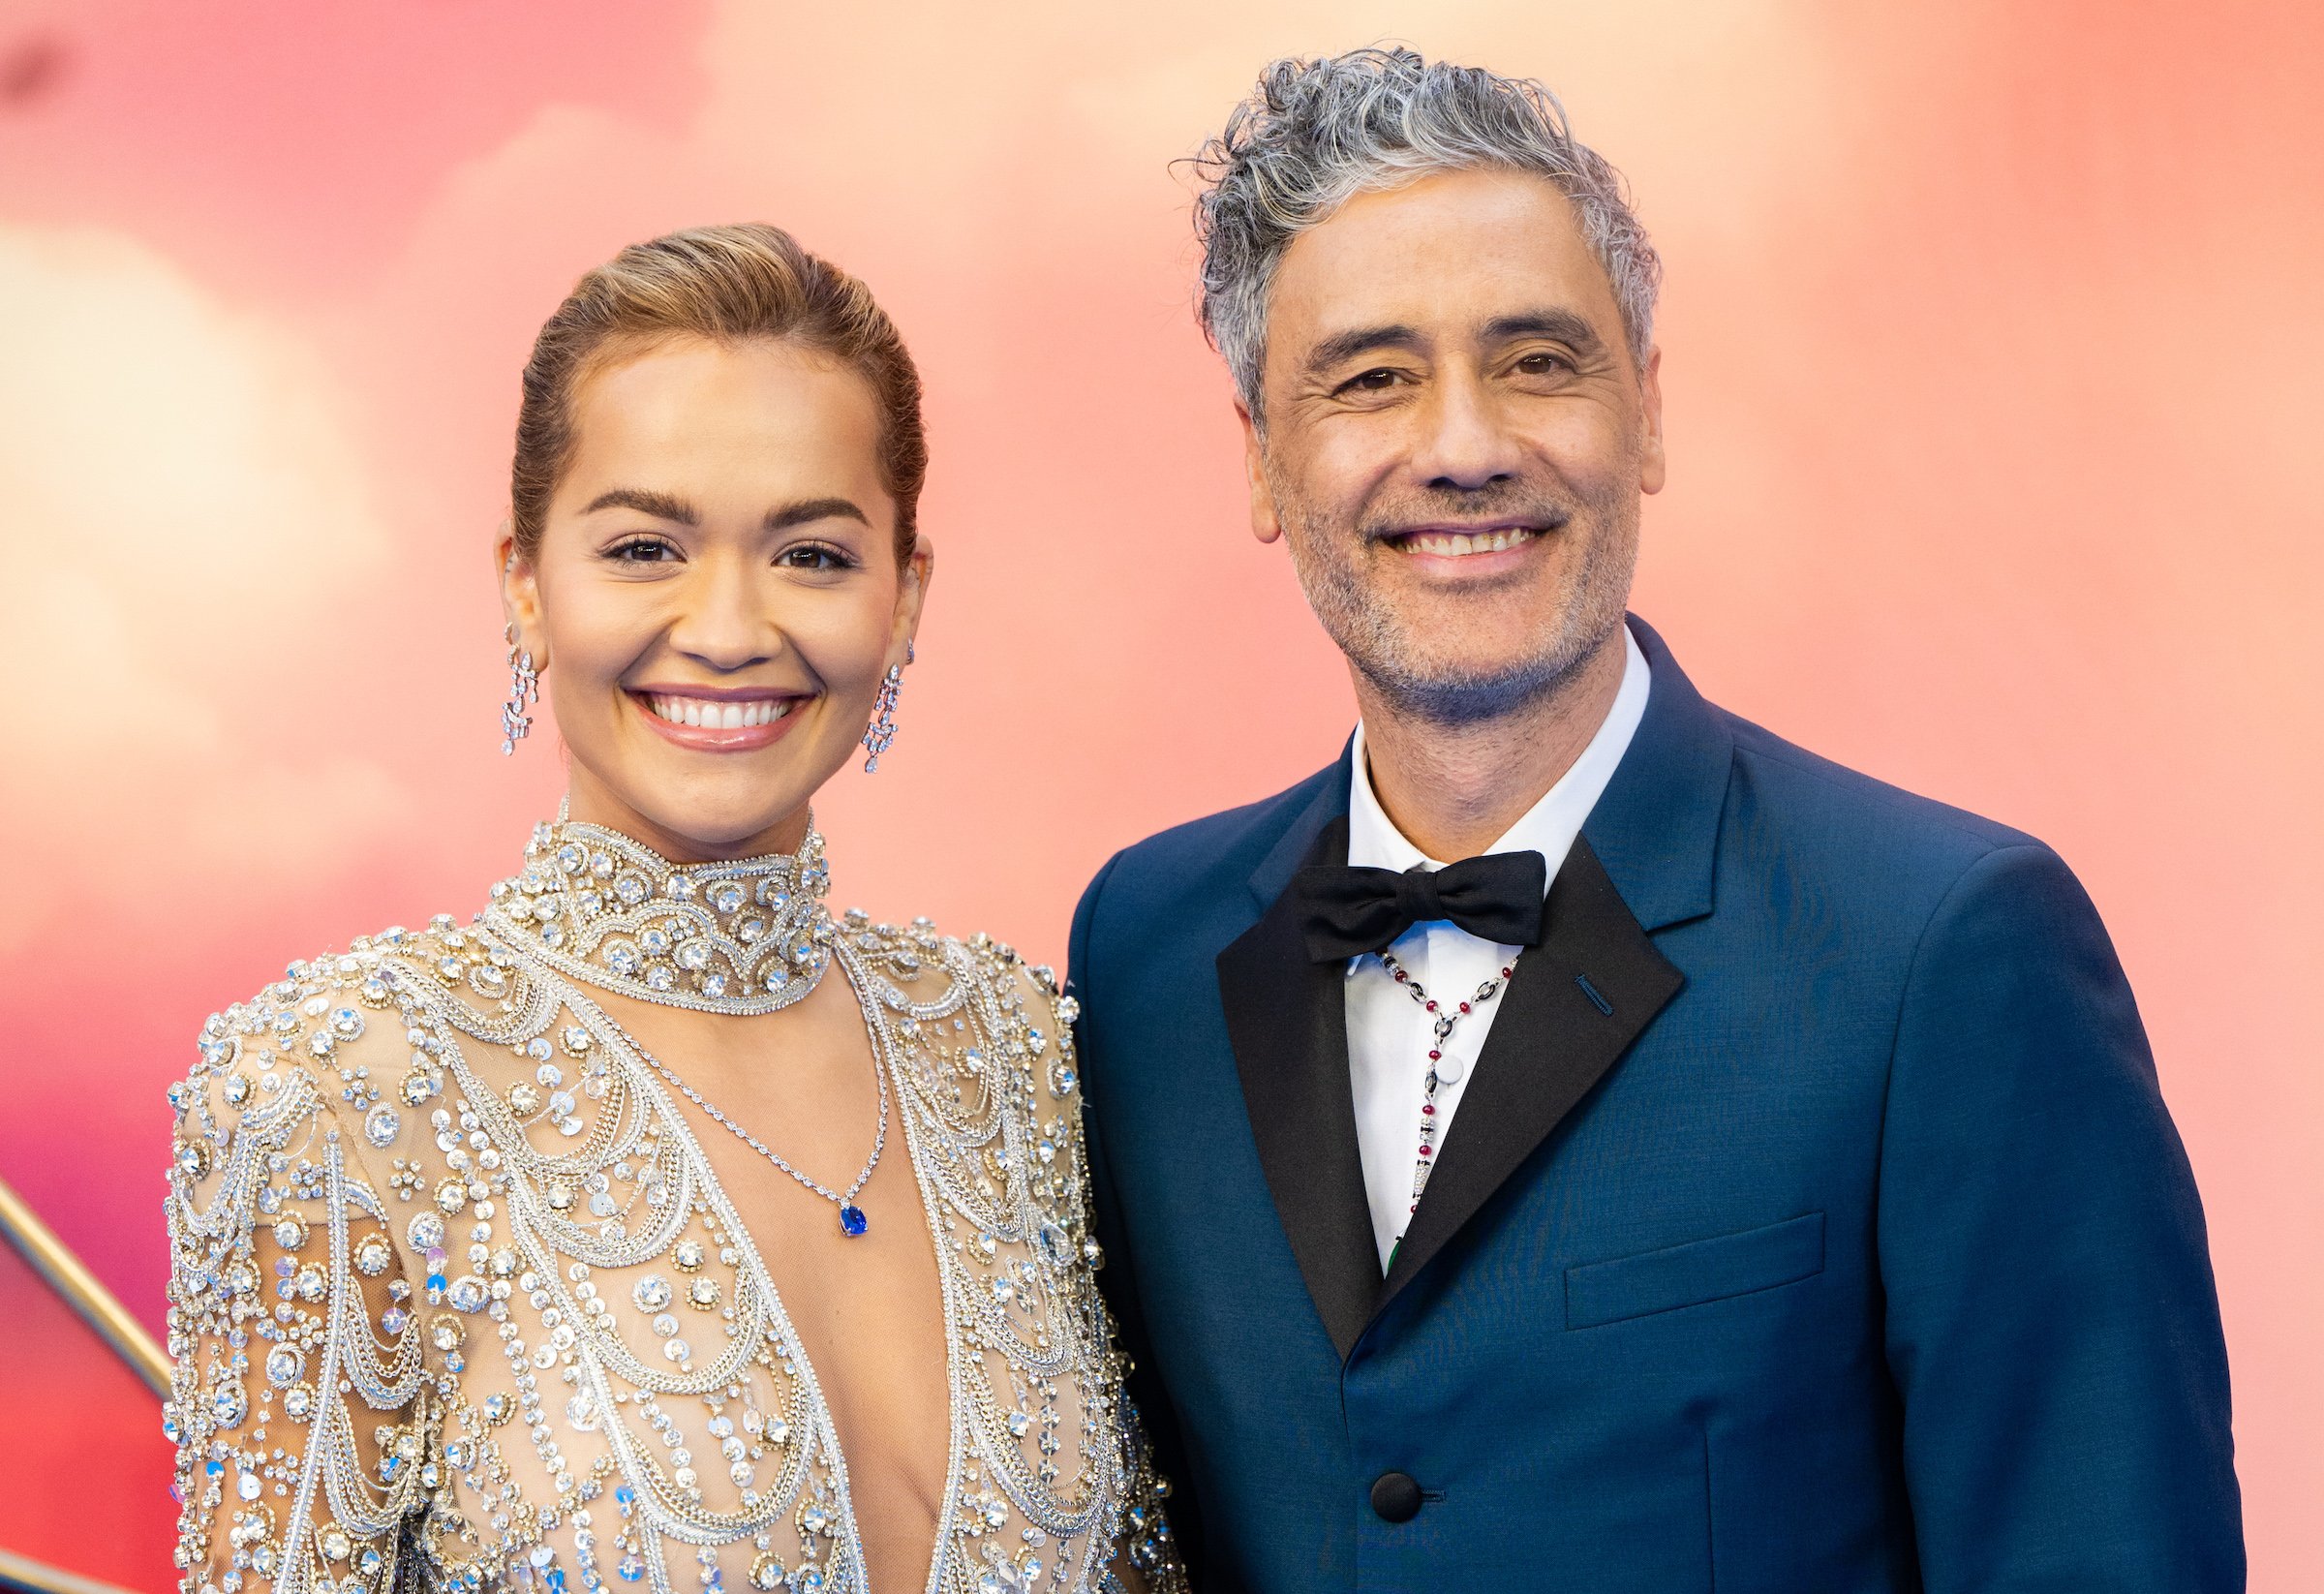 Rita Ora and Taika Waititi Reportedly Got Married in a Secret Ceremony